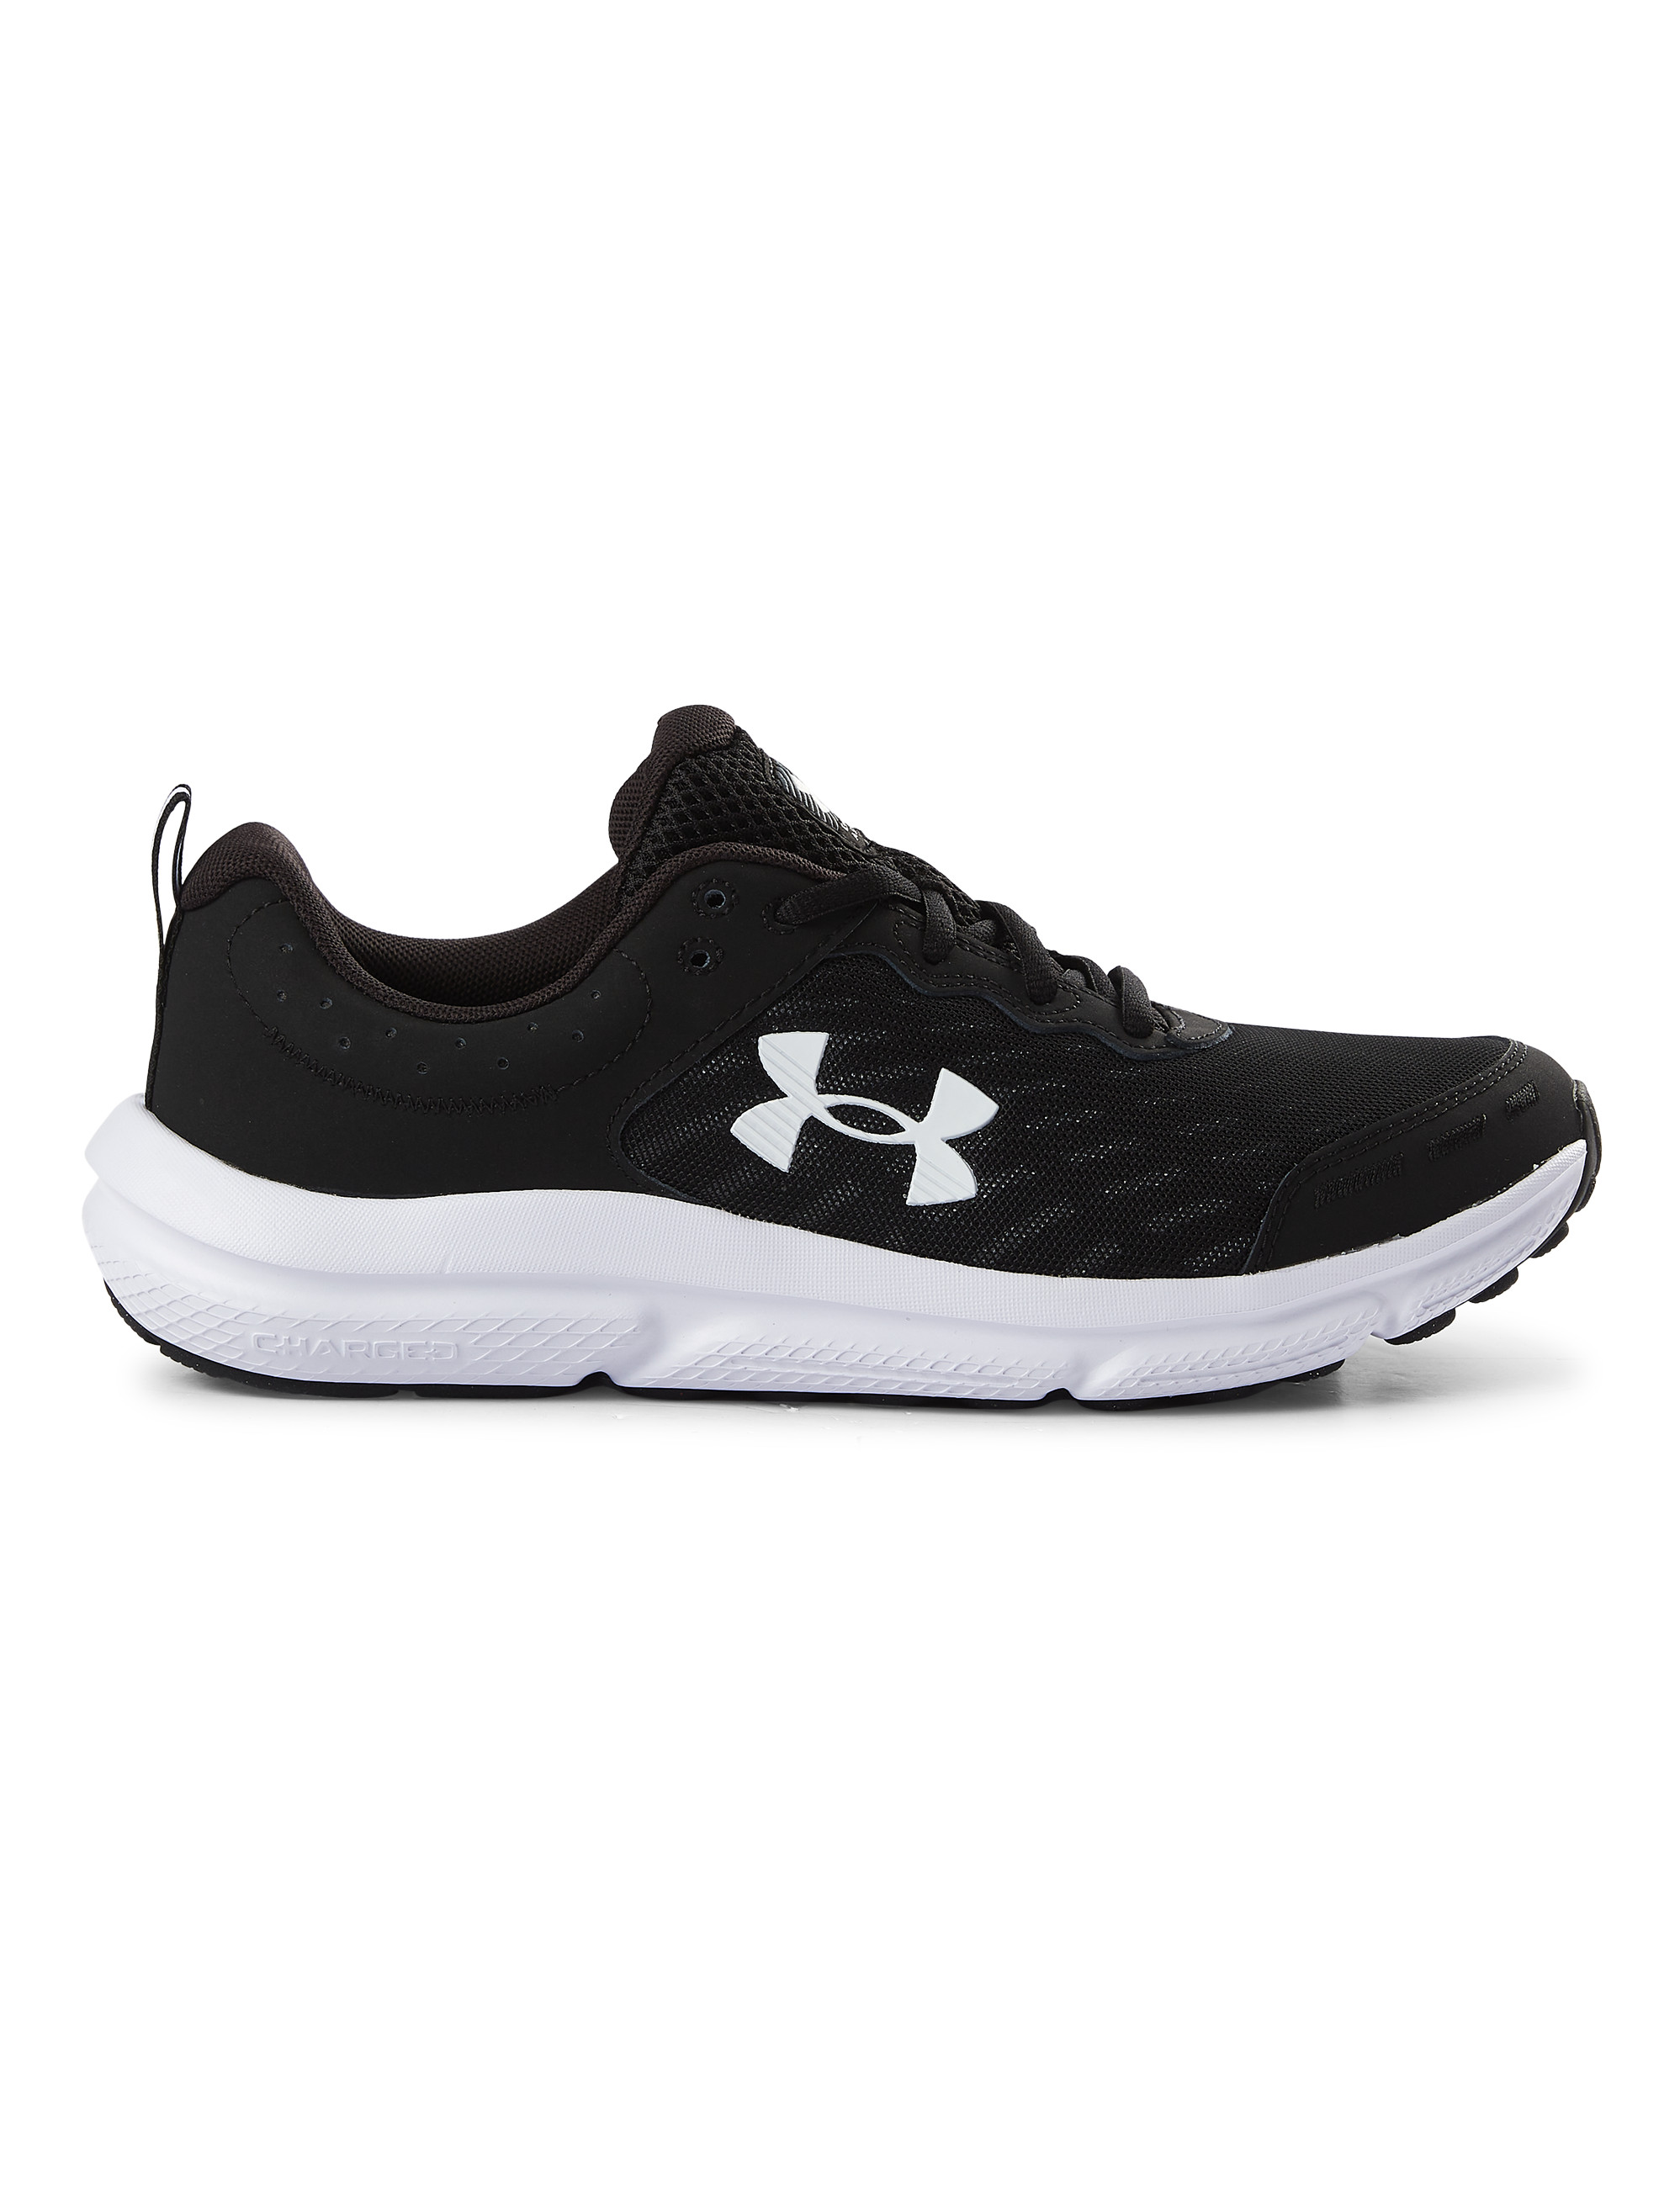 Big + Tall, Under Armour Charged Assert 10 Running Shoes